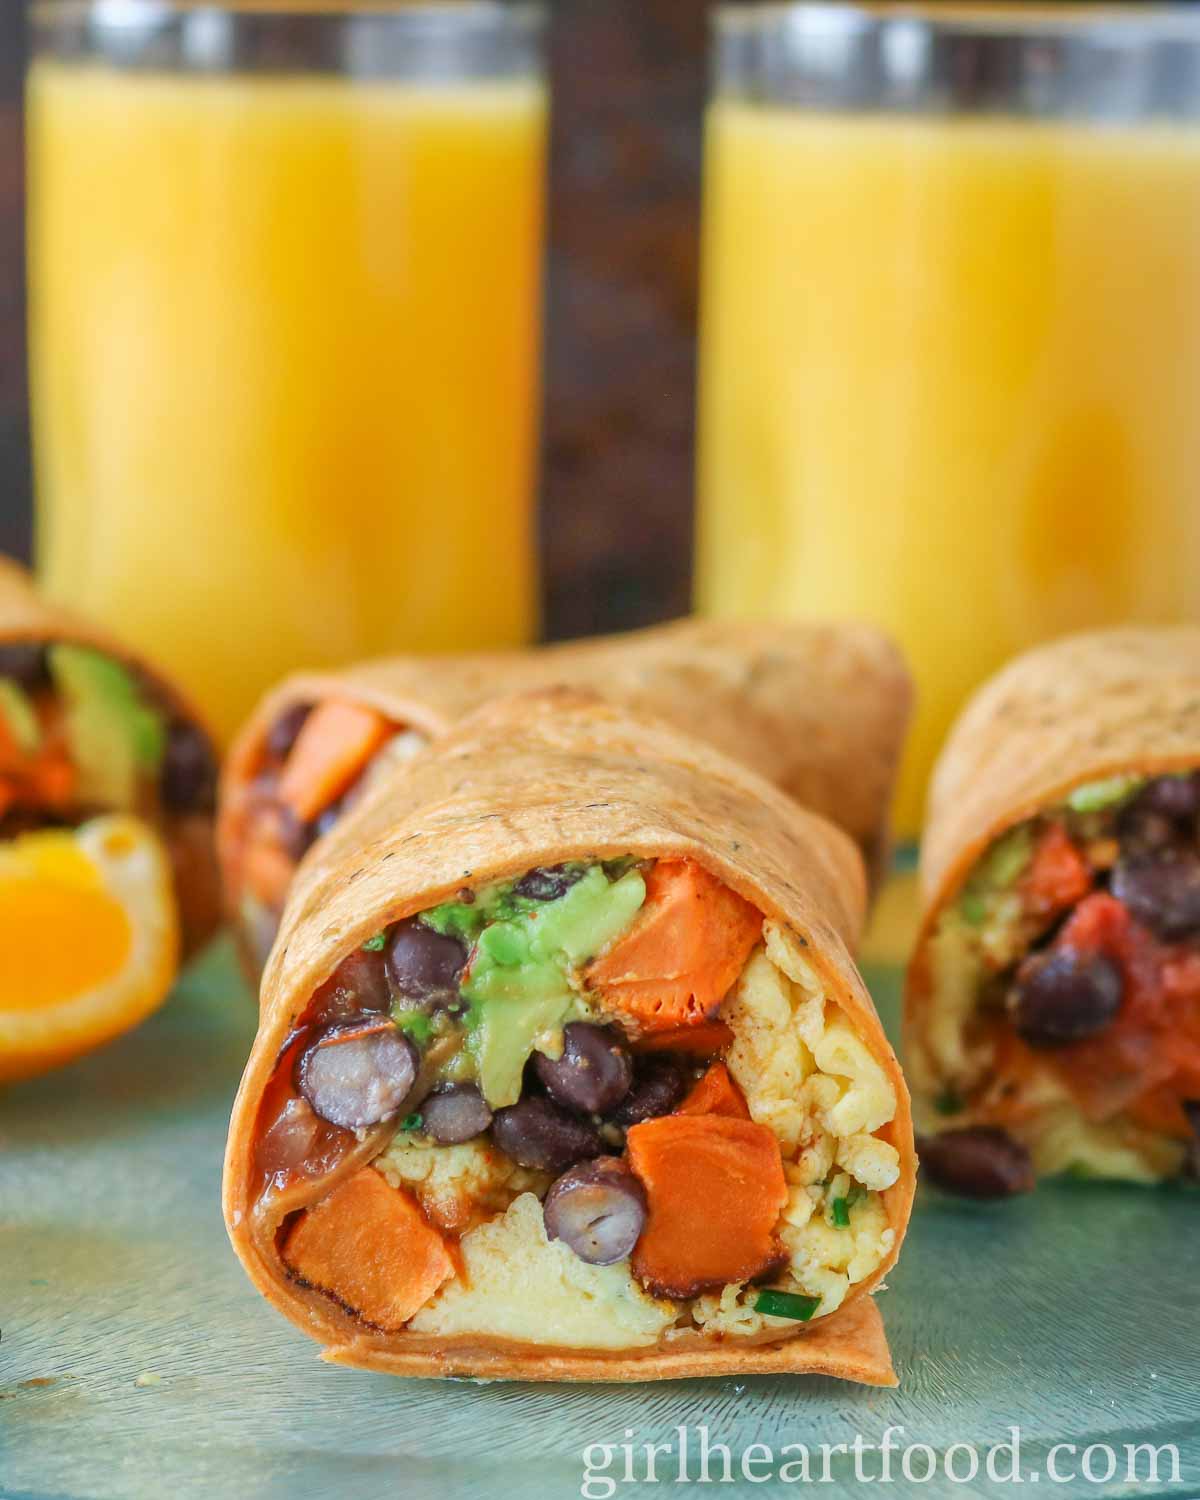 Four scrambled egg wraps in front of two glasses of orange juice.